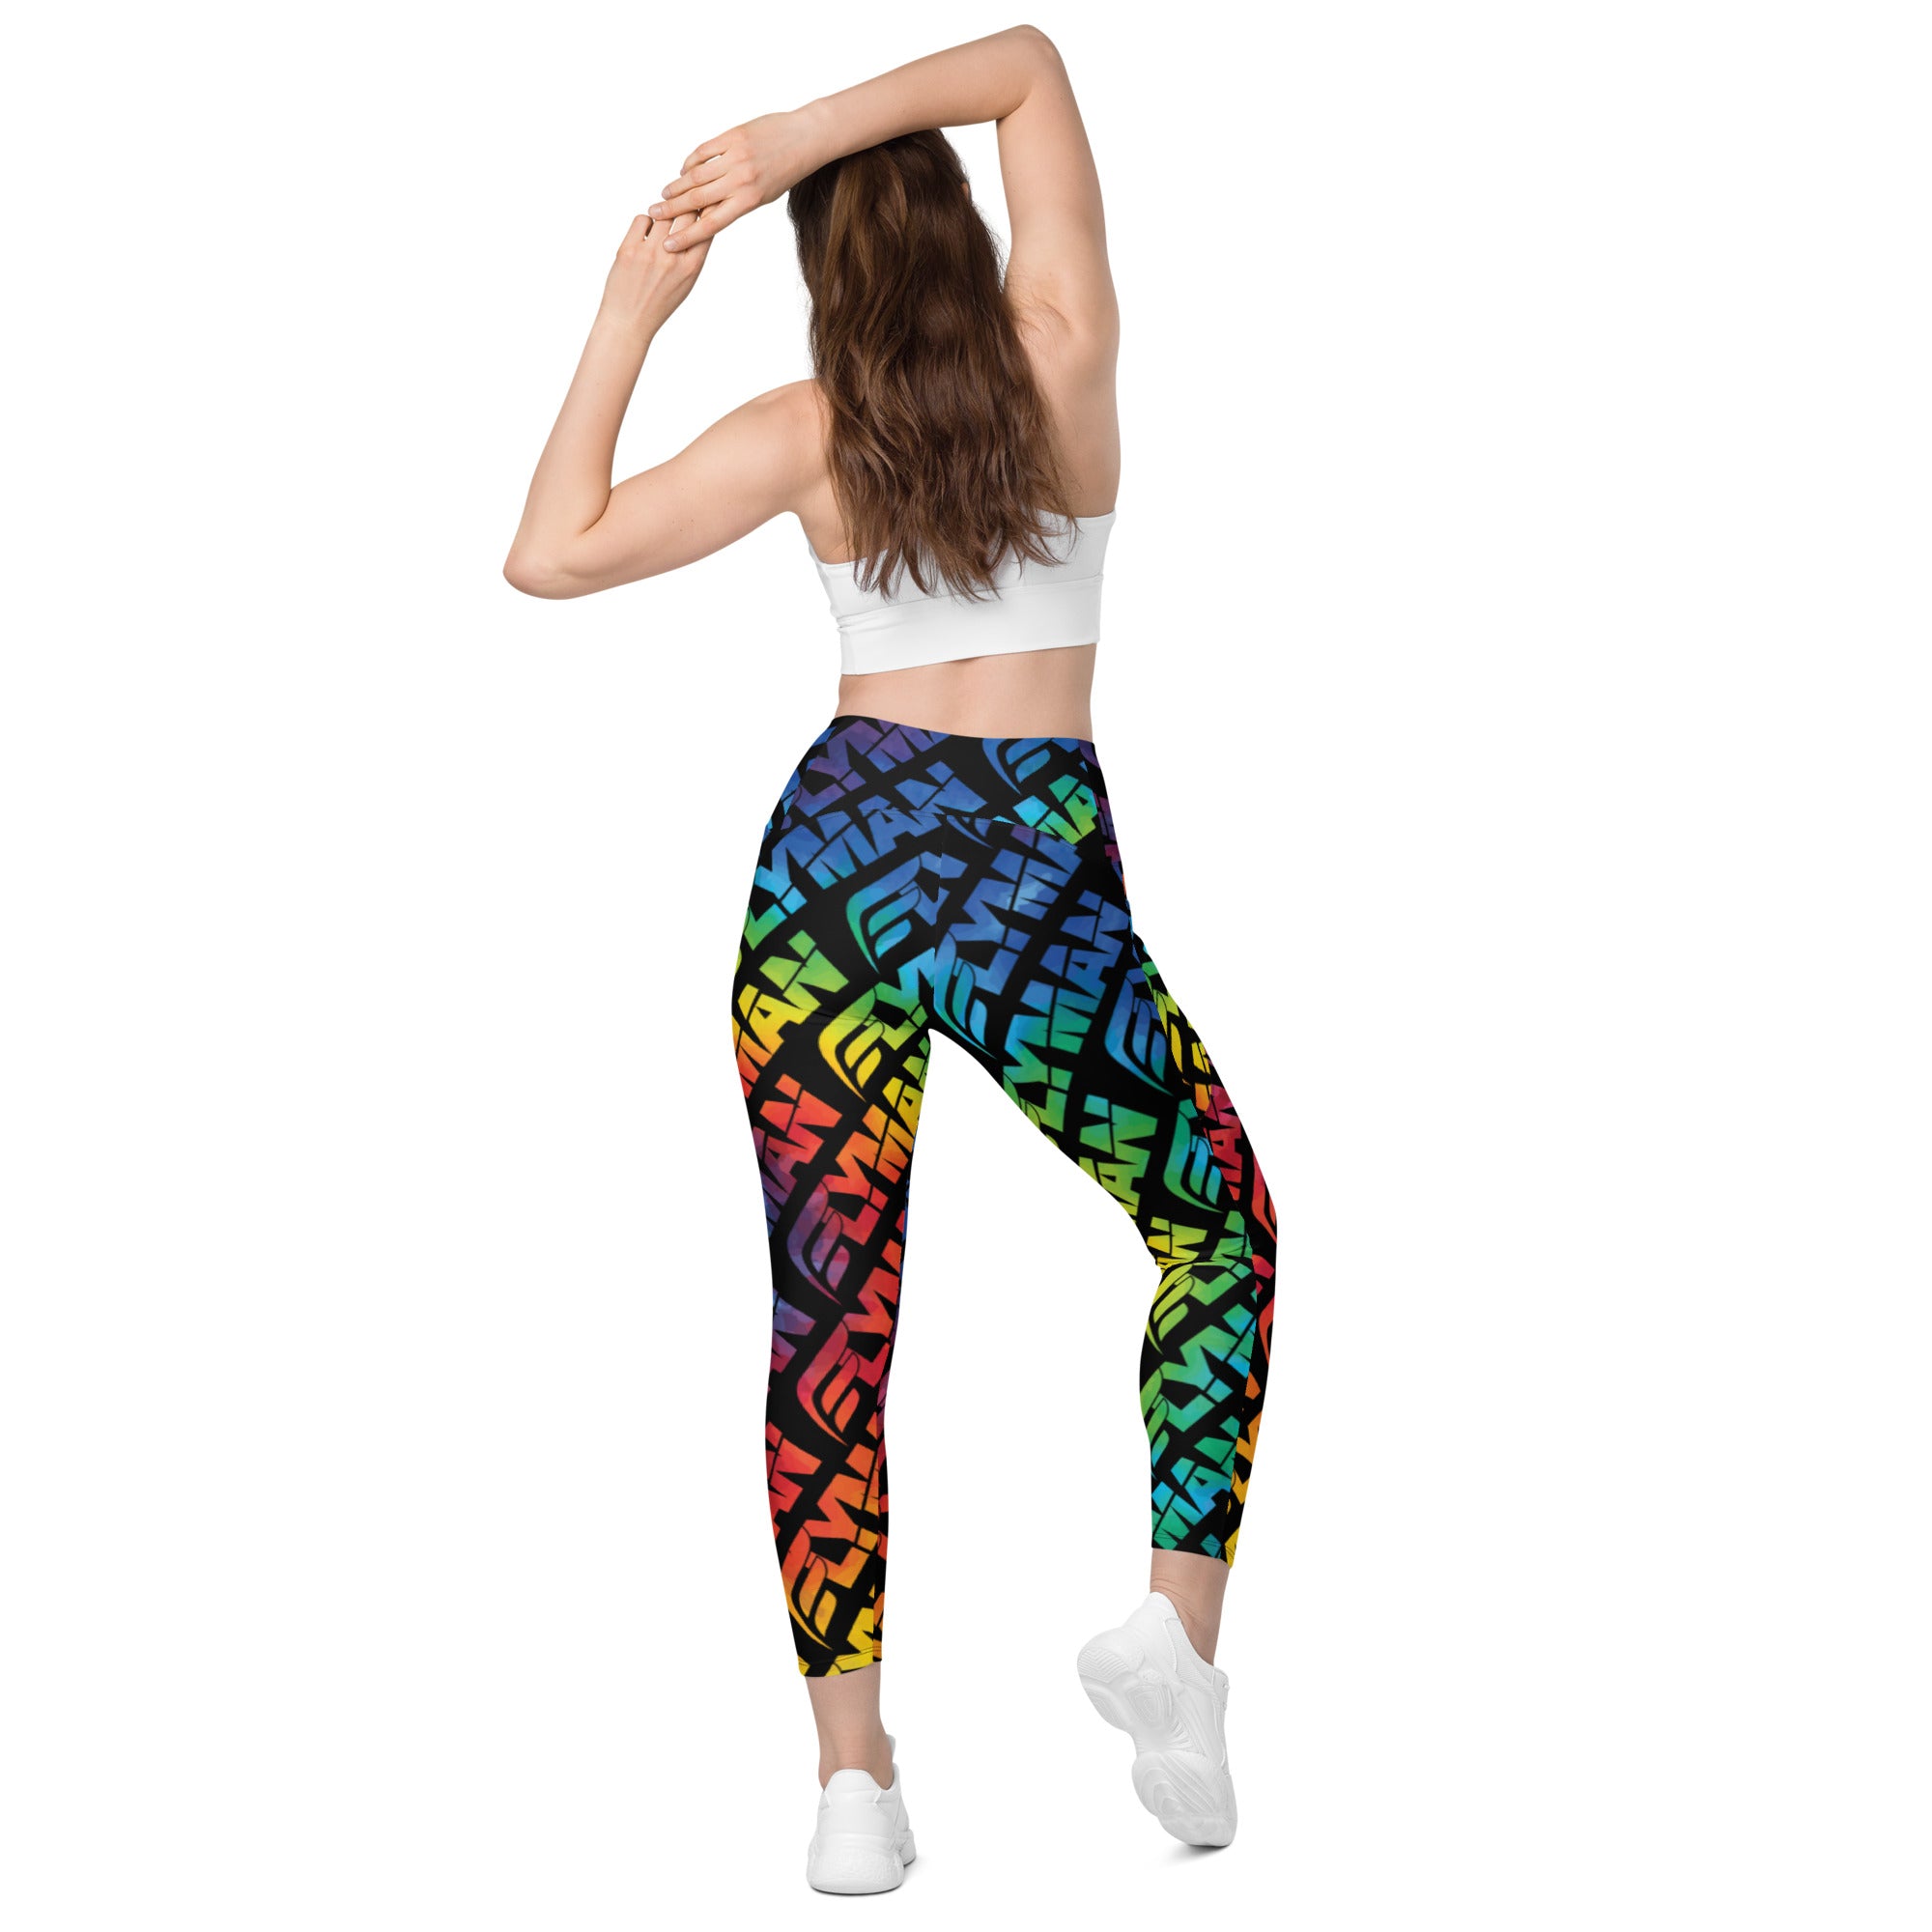 Flyman Tie Crossover leggings with pockets